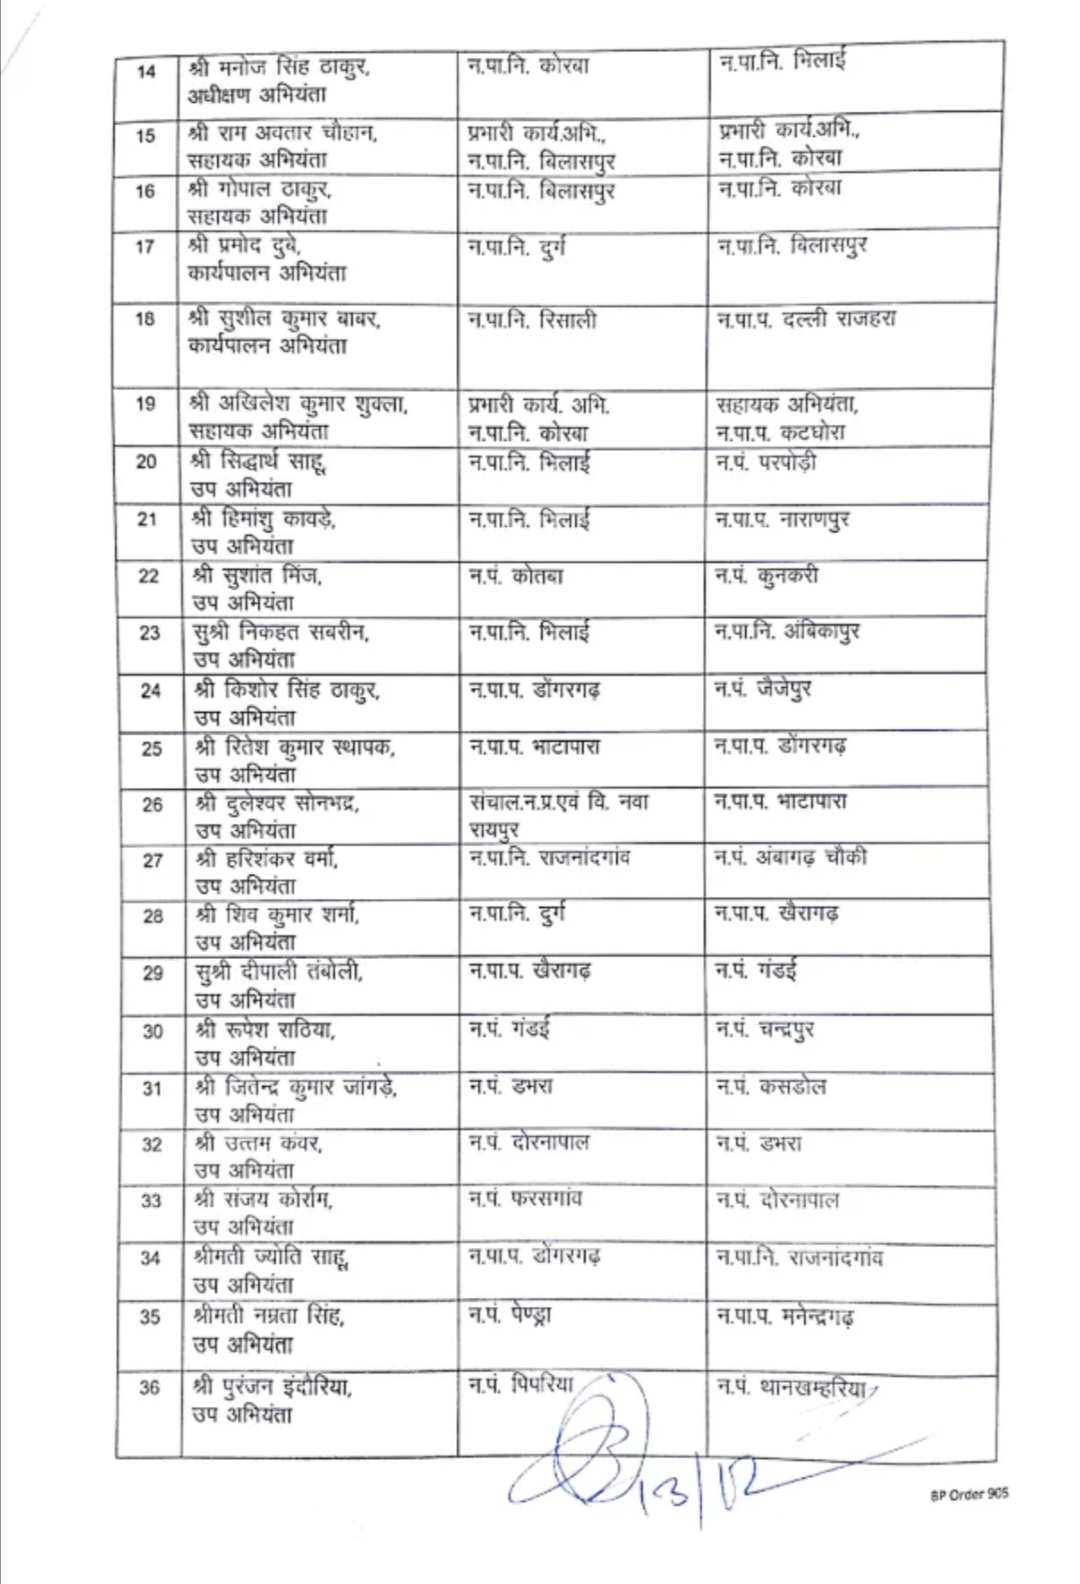 Transfer breaking, transfer list of 98 officers and employees, Urban Administration Department, Chief Municipal Officer, Engineer, Assistant Revenue Inspector, Chhattisgarh, Khabargali